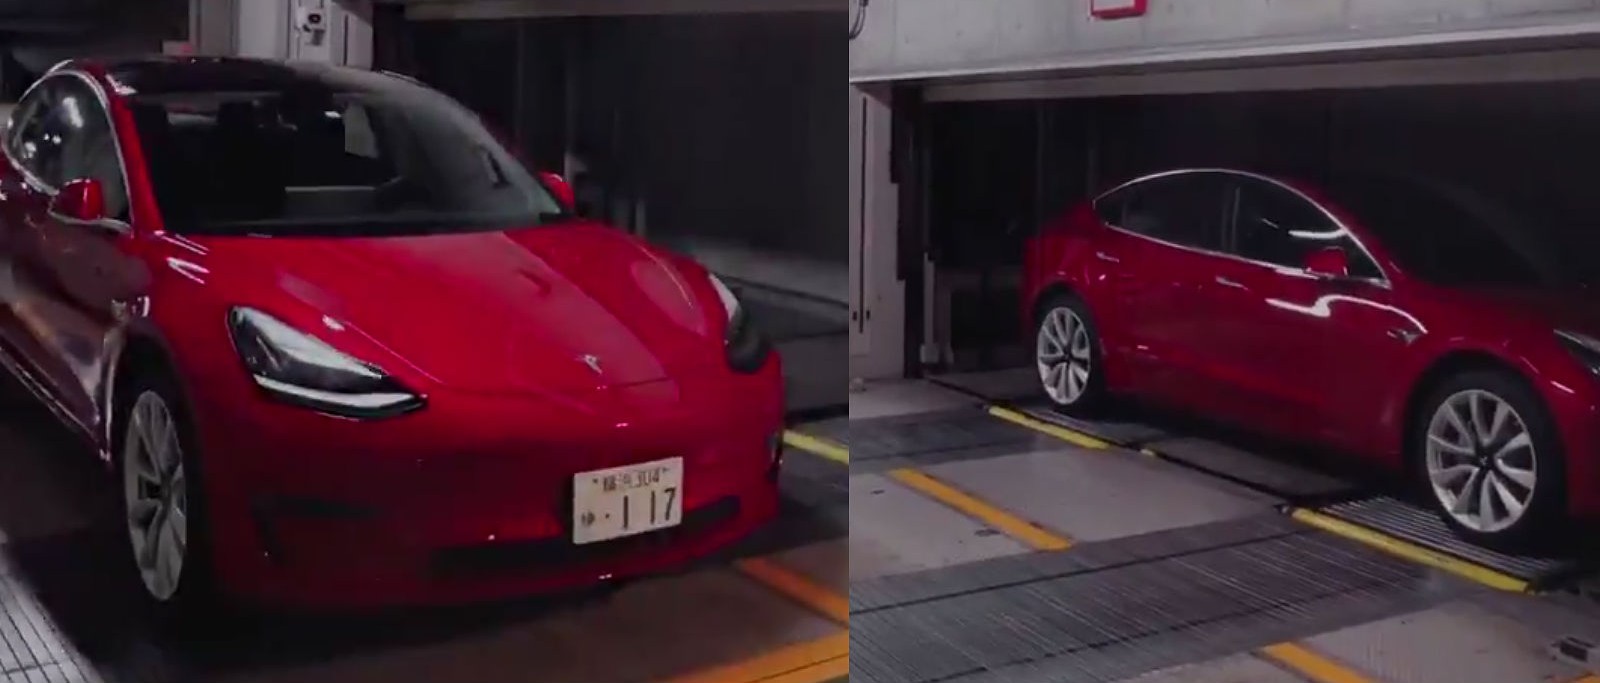 Tesla showcases why the Model 3 is perfect for small parking spaces